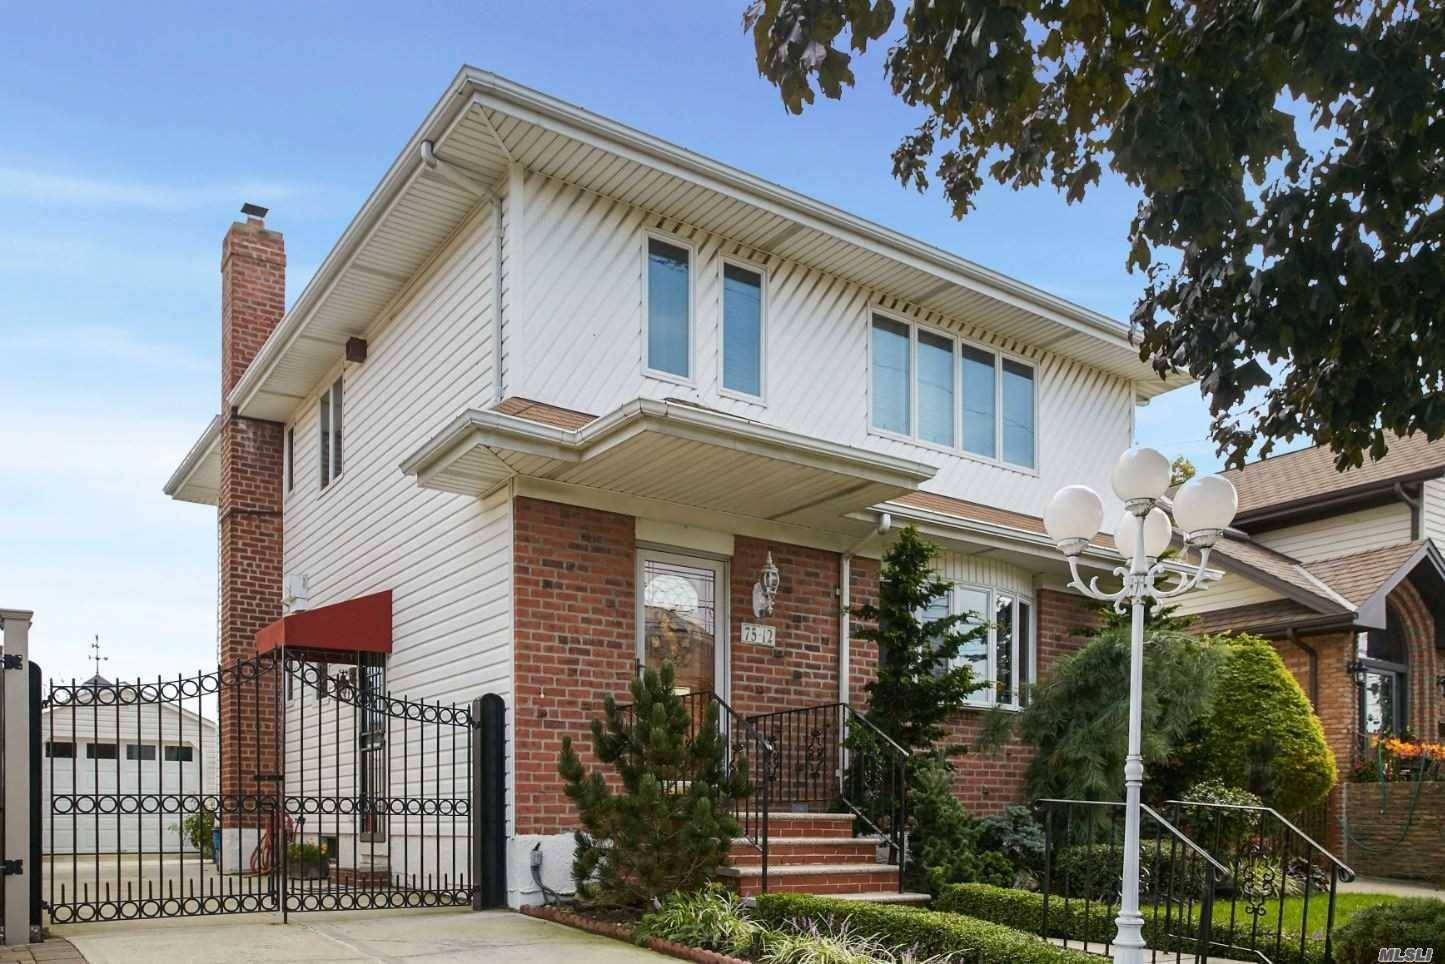 Beautiful 1 Family Detached Home On An Oversized Lot 40X95 In The Heart Of Midle Village Located On A Desirable Block Penelope Ave.